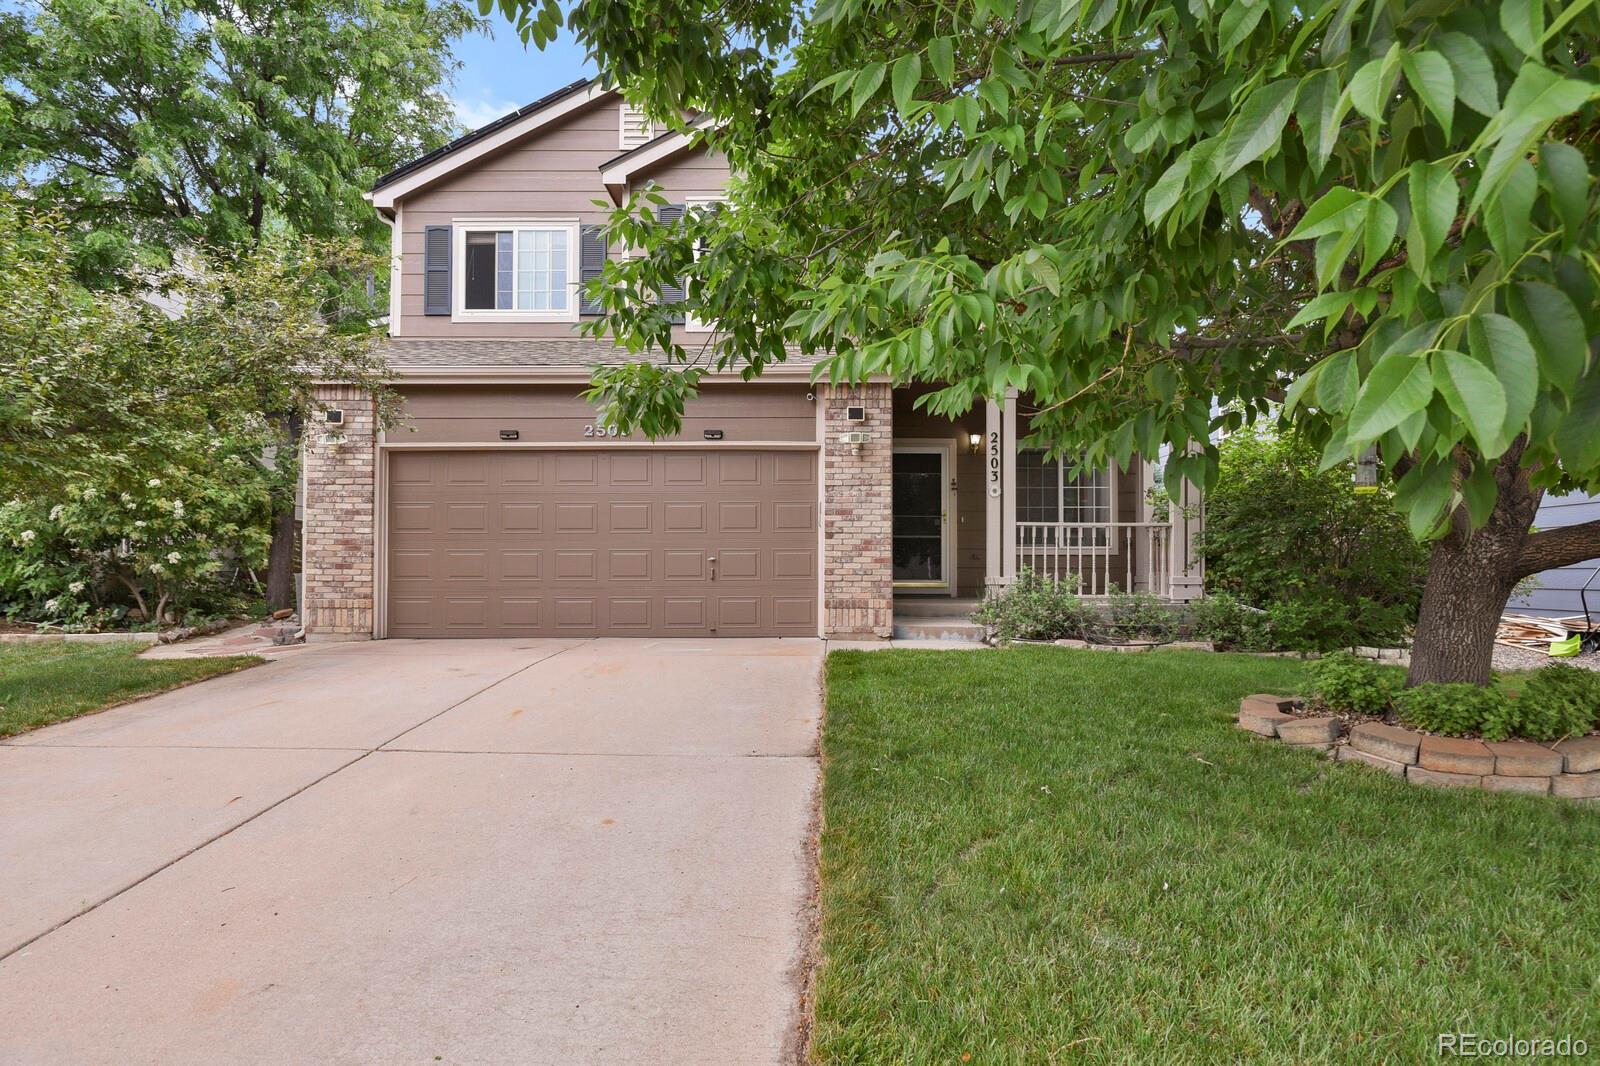 2503  Cove Creek Court, highlands ranch MLS: 9925206 Beds: 4 Baths: 4 Price: $670,000